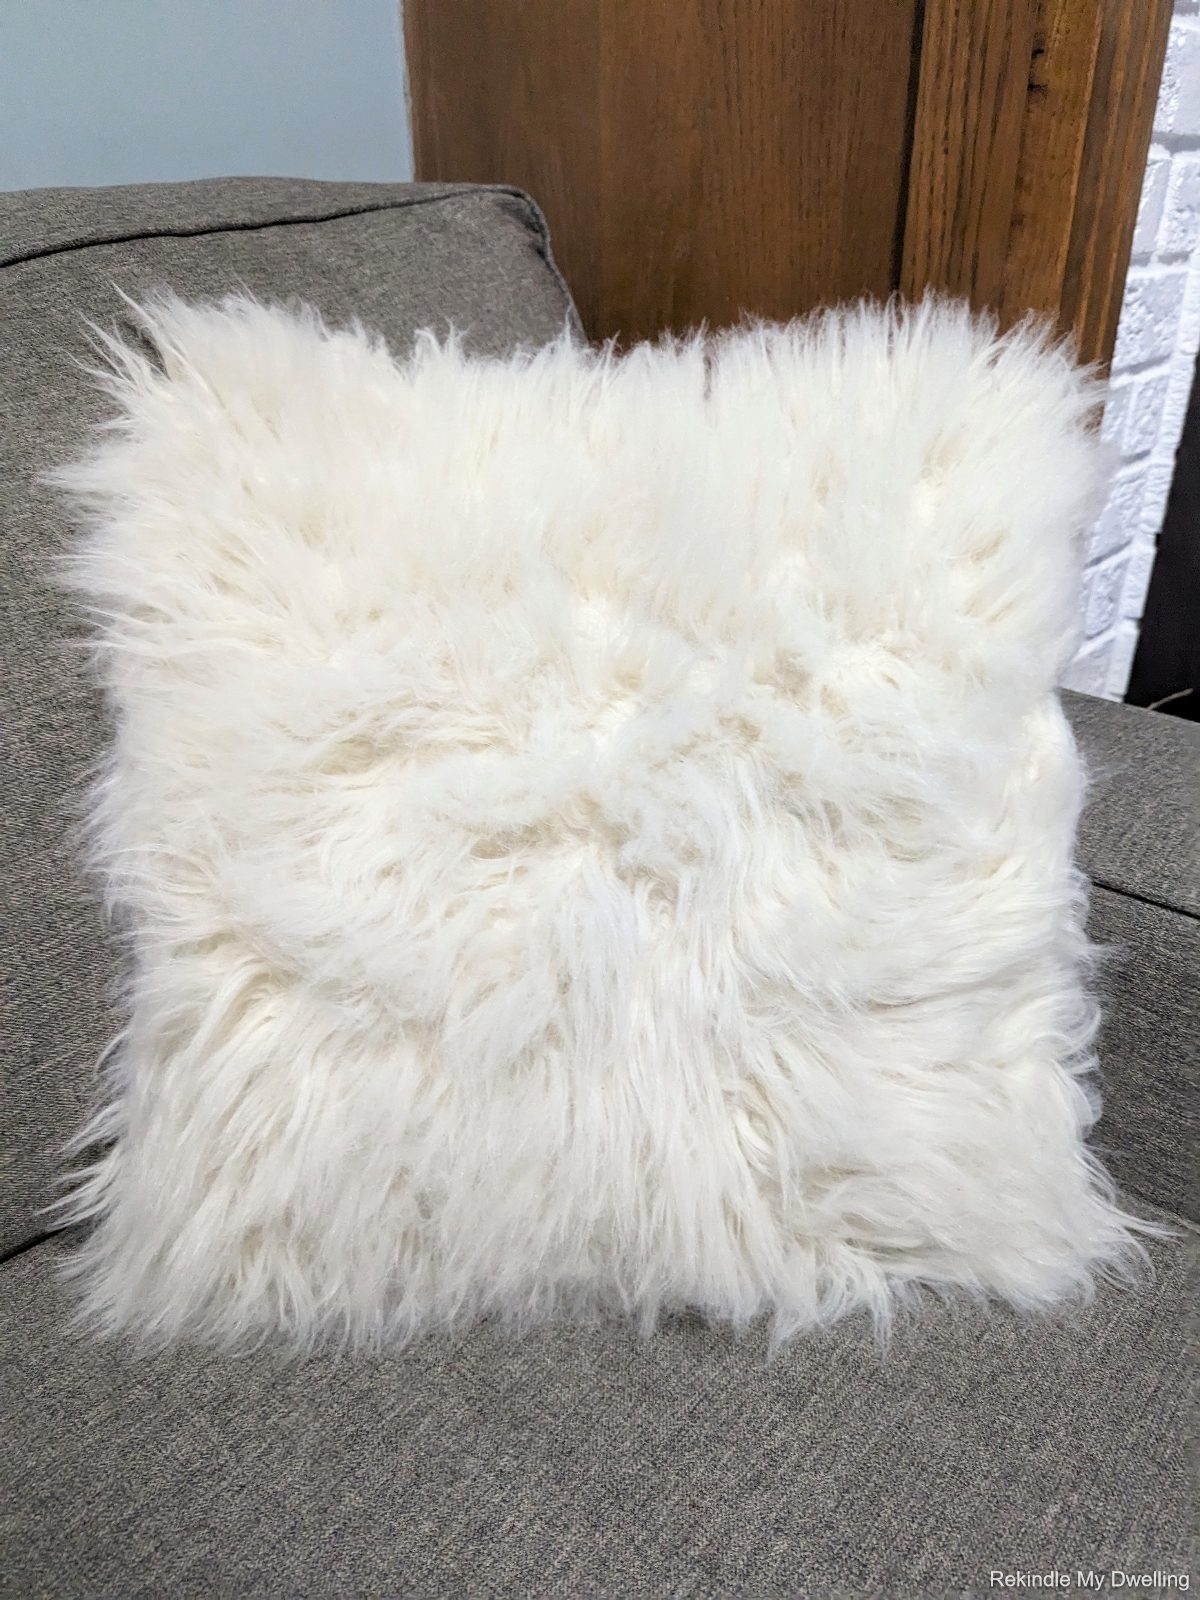 My favourite throw pillows had those annoying fluff bits on them